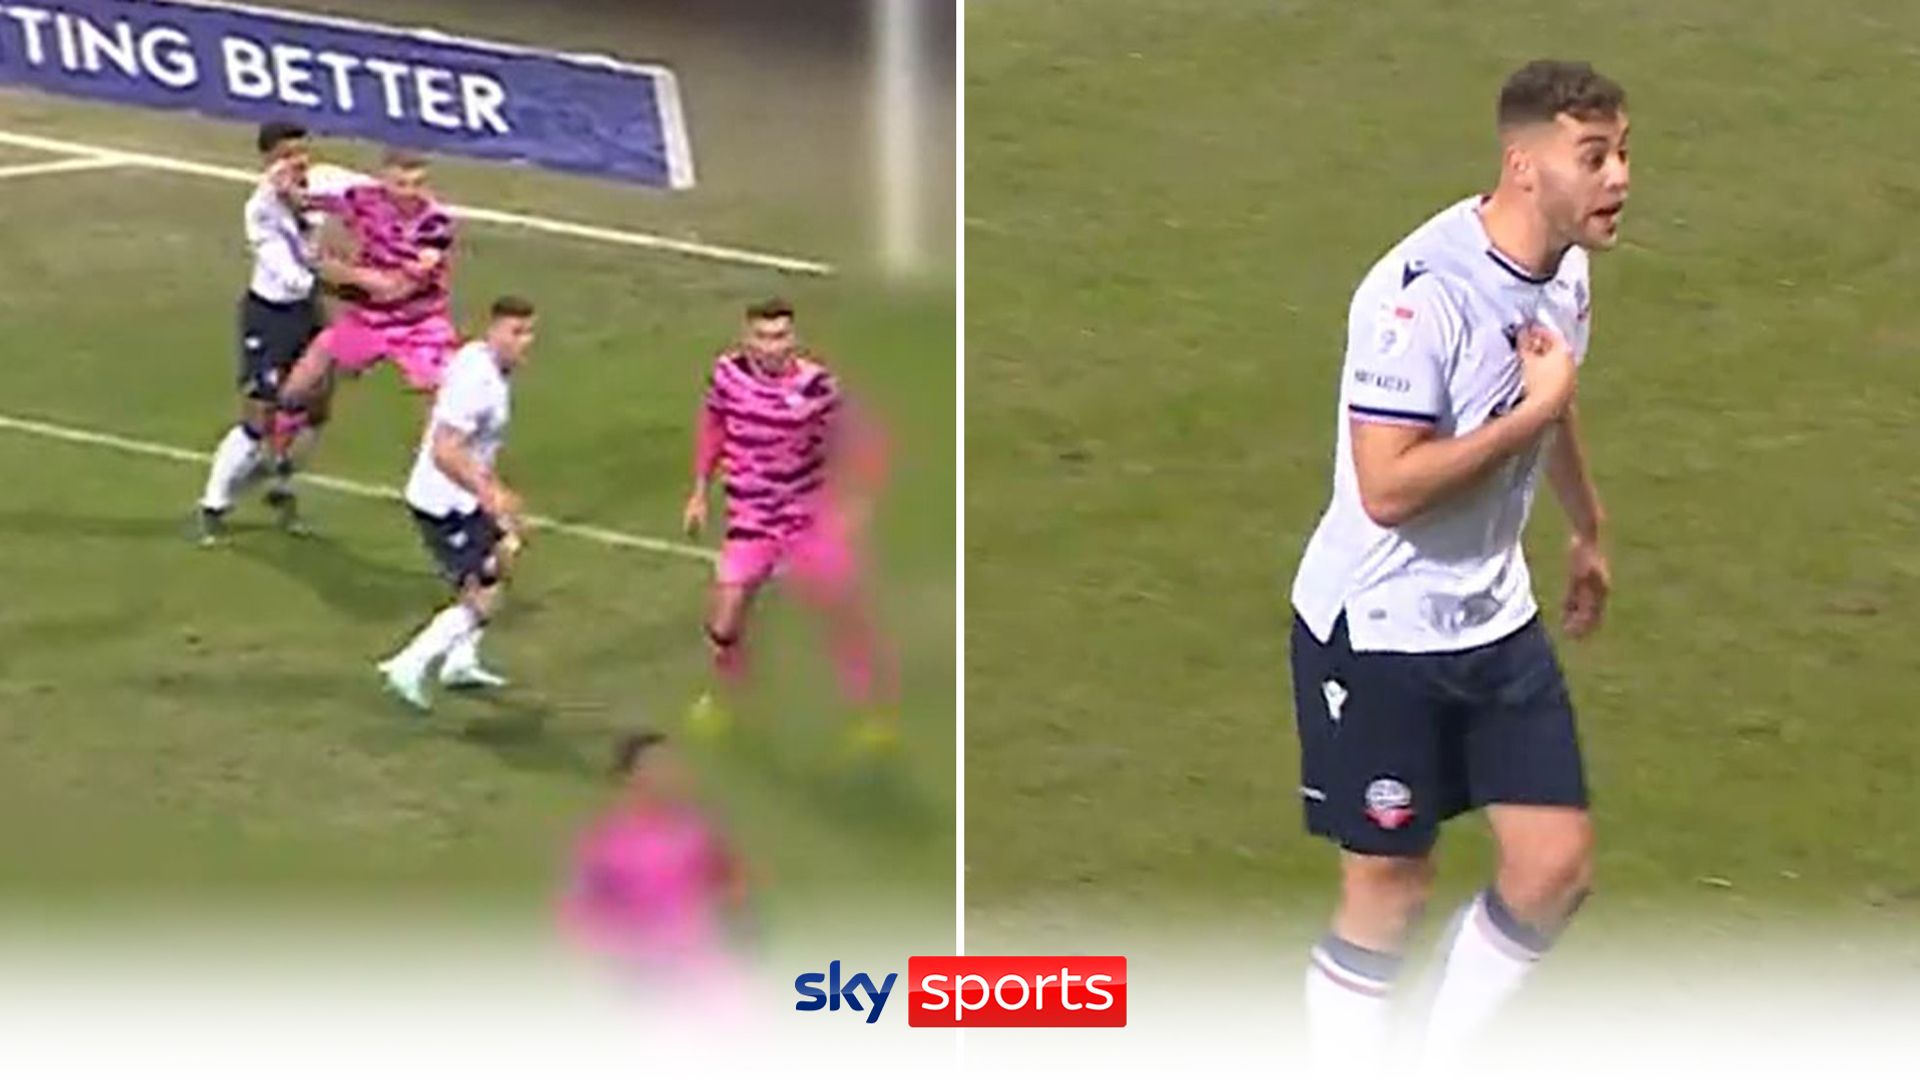 Referee sends wrong player off for violent conduct!